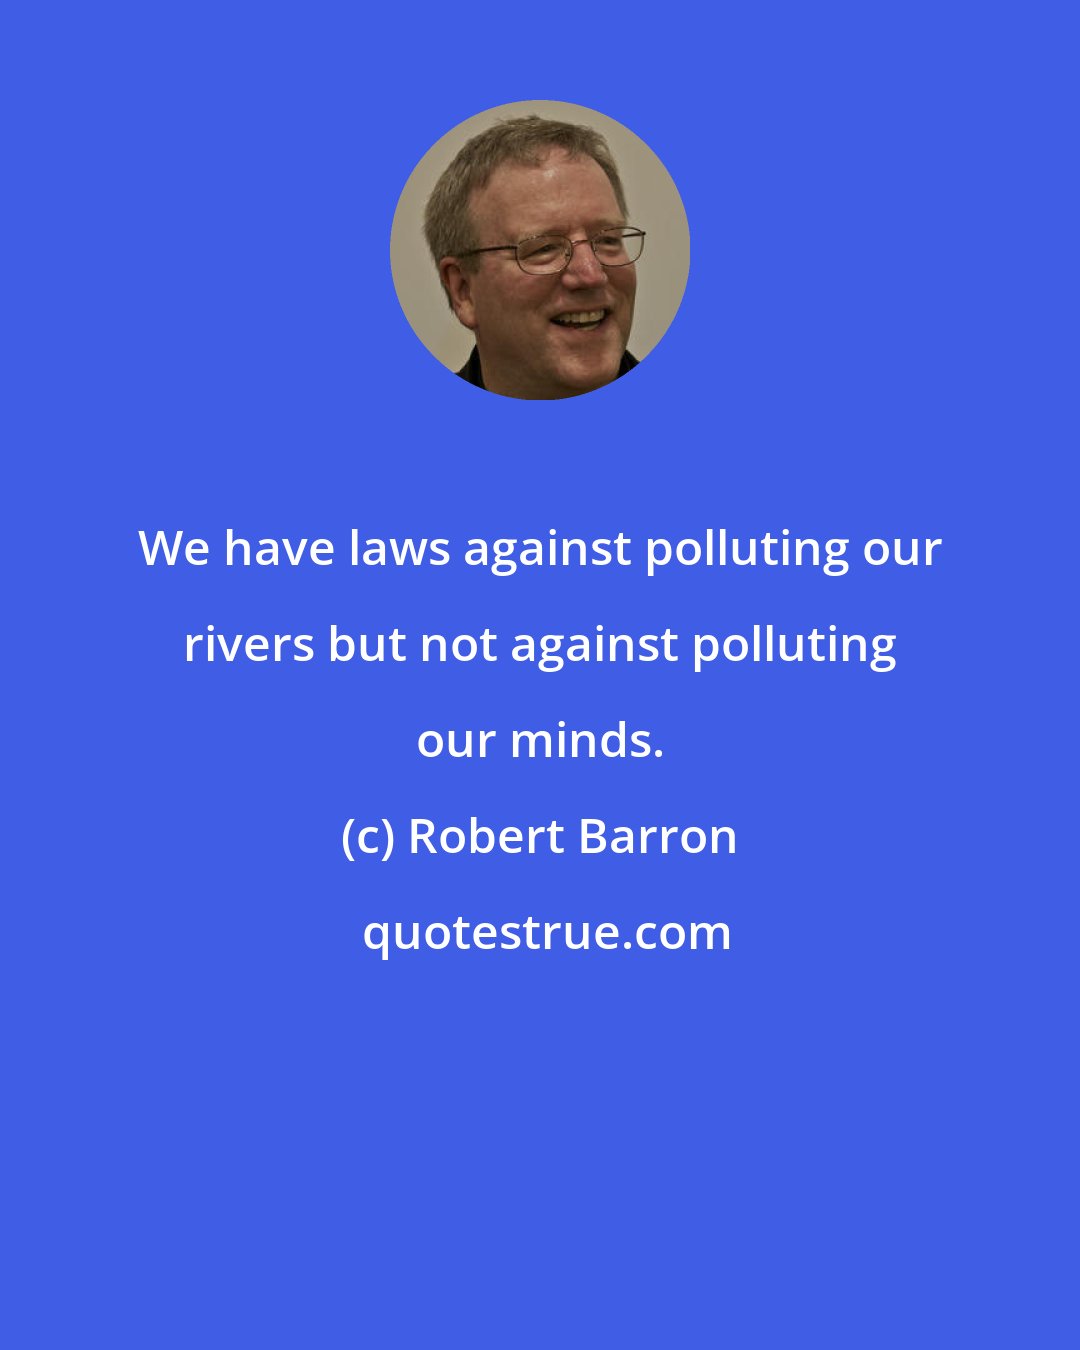 Robert Barron: We have laws against polluting our rivers but not against polluting our minds.